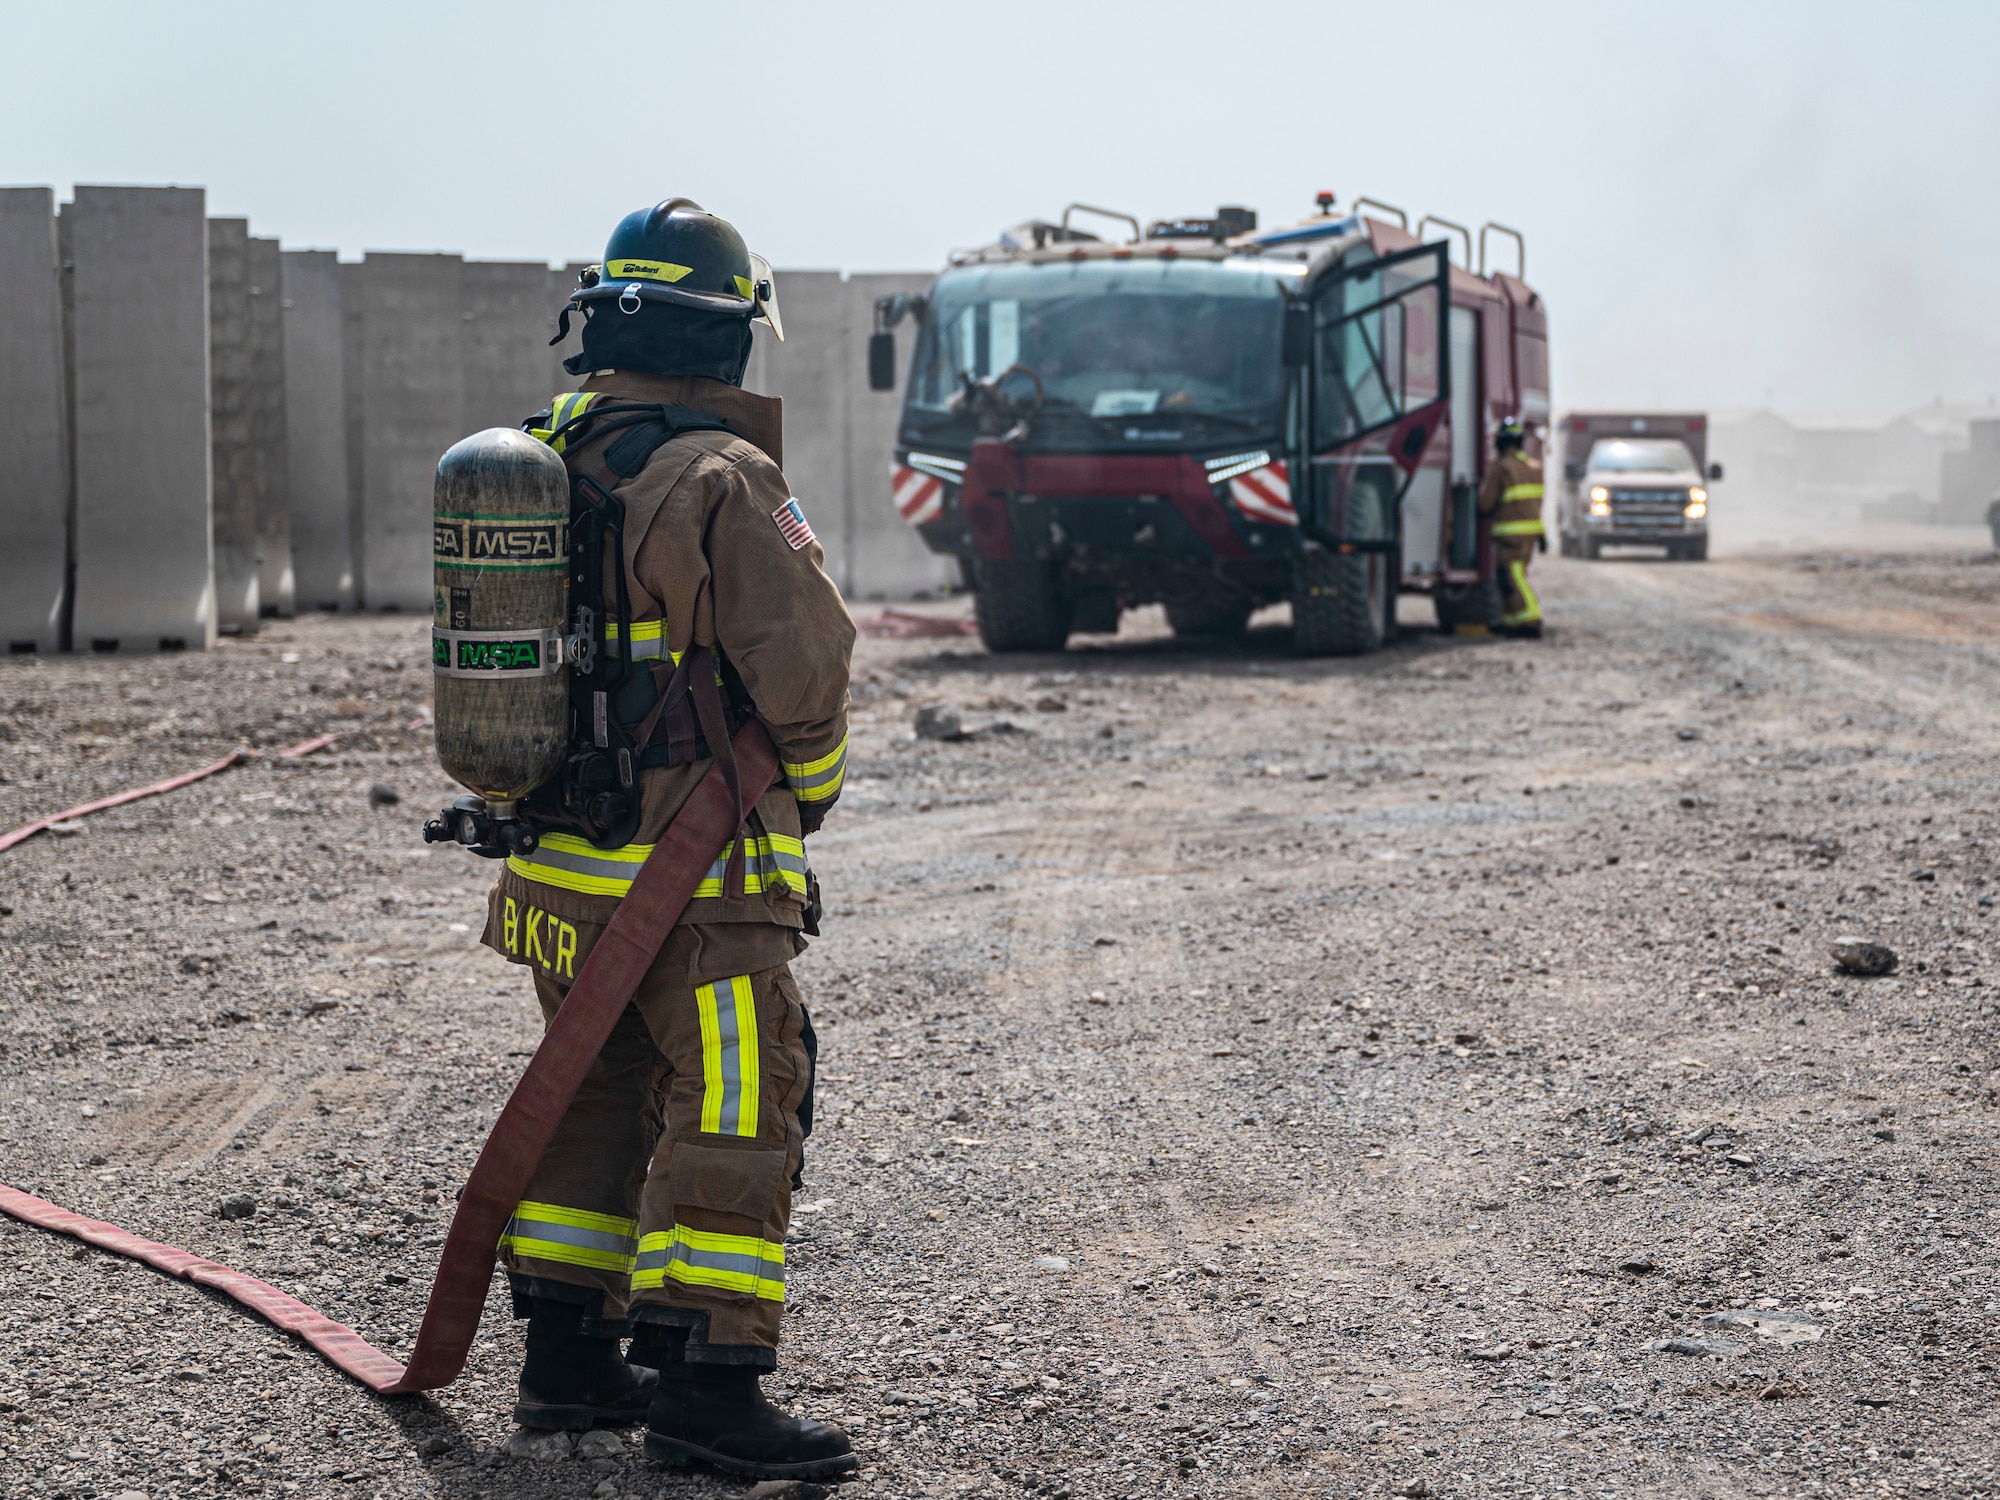 U.S Air Force firefighters and Army medics hone readiness skills at Chabelley Airfield